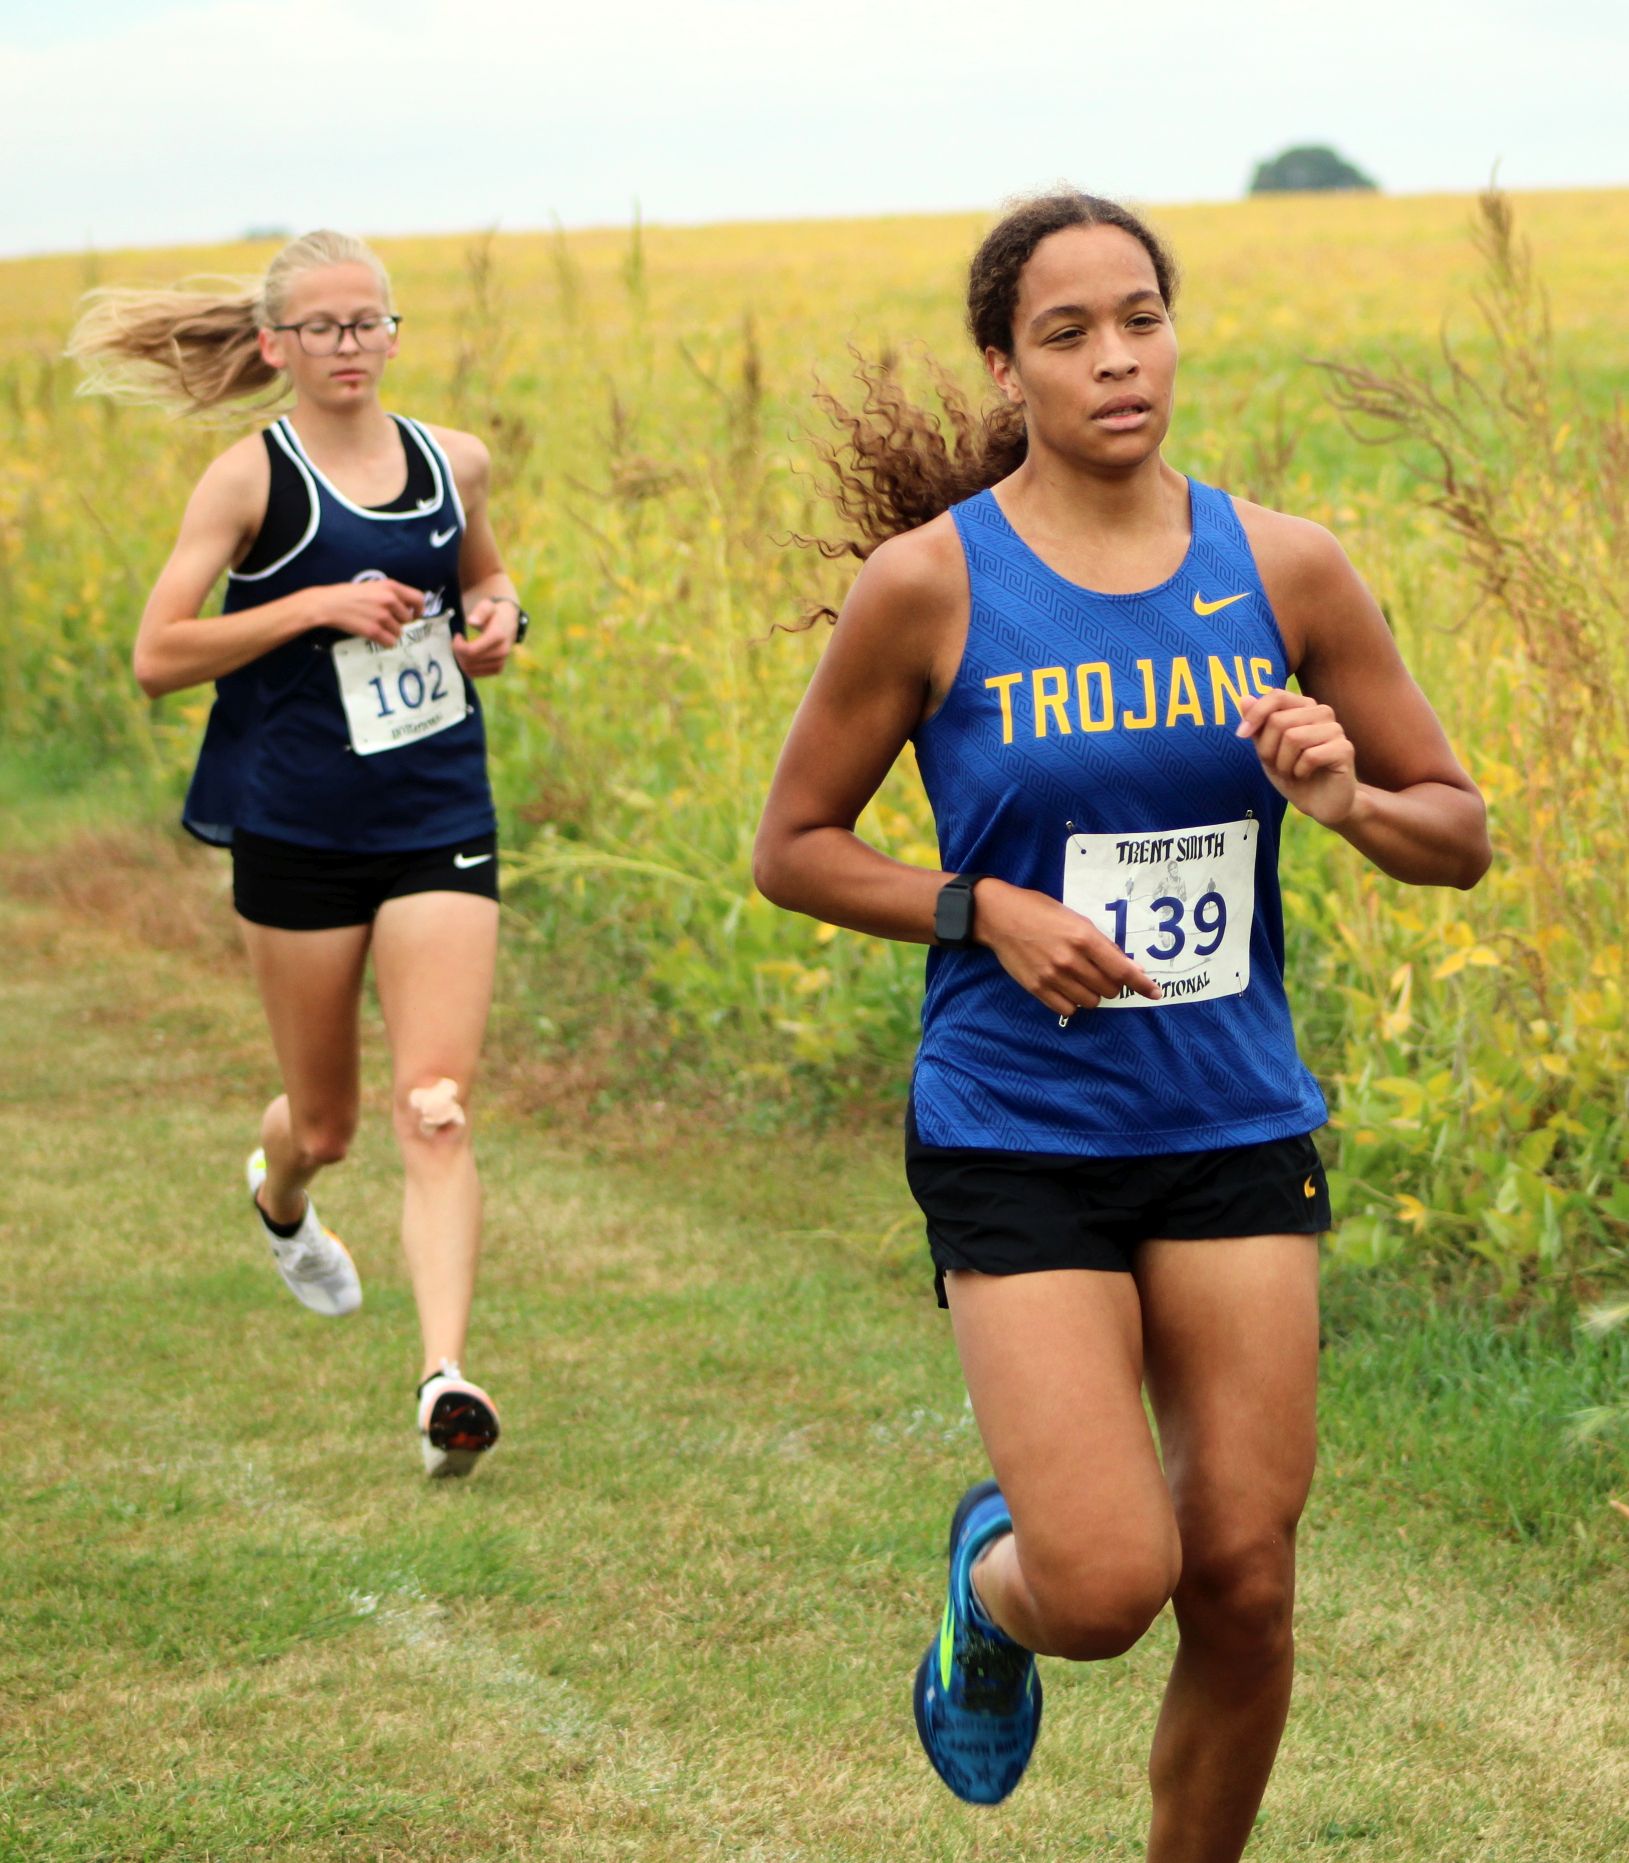 NIACC's Taja Conley runs at the Trent Smith Invitational on the NIACC campus on Sept. 15.